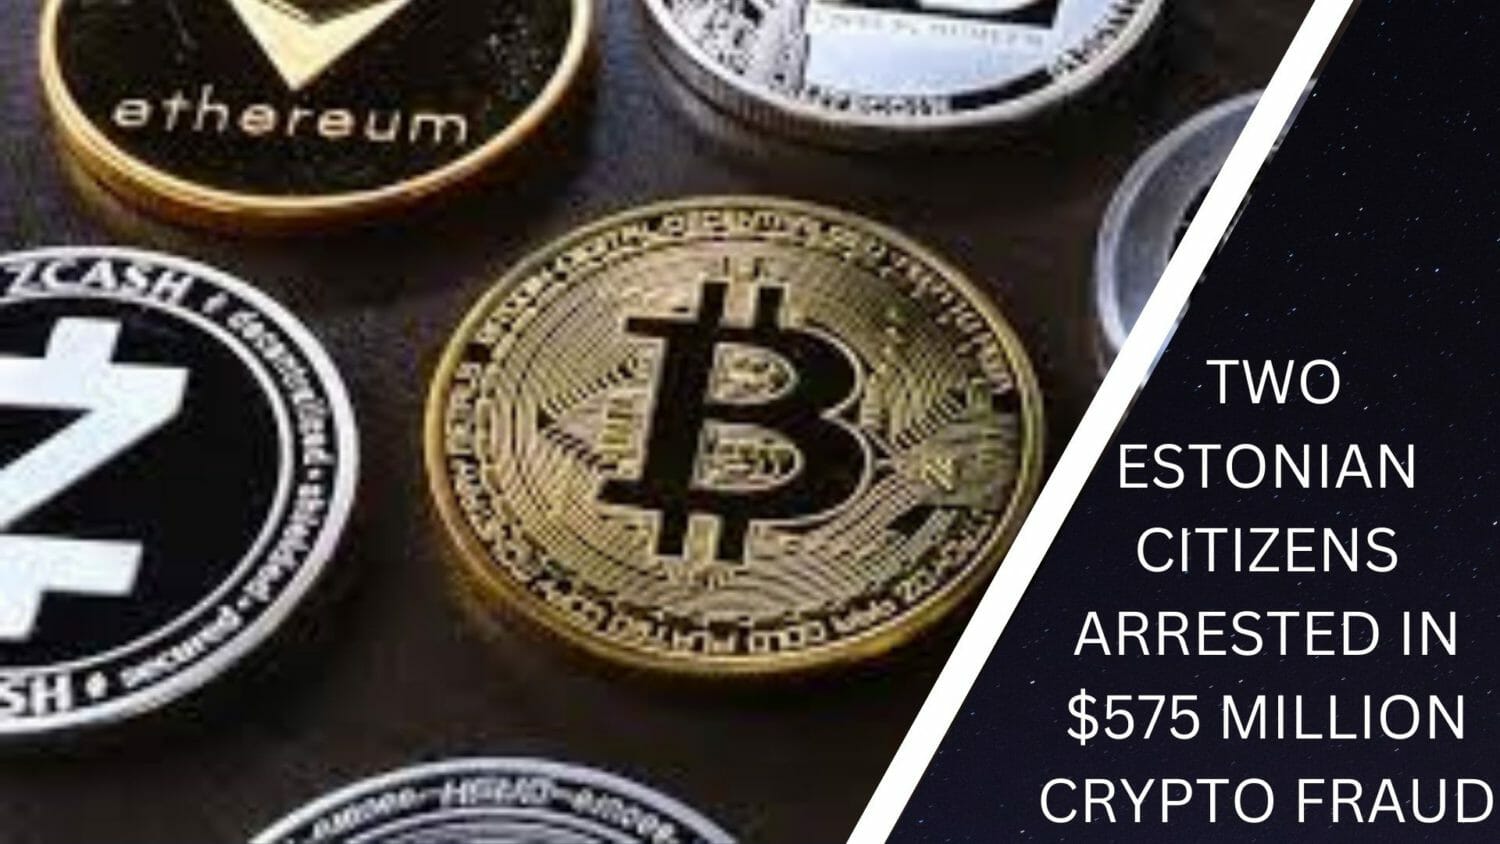 Two Estonian Citizens Arrested In $575 Million Crypto Fraud